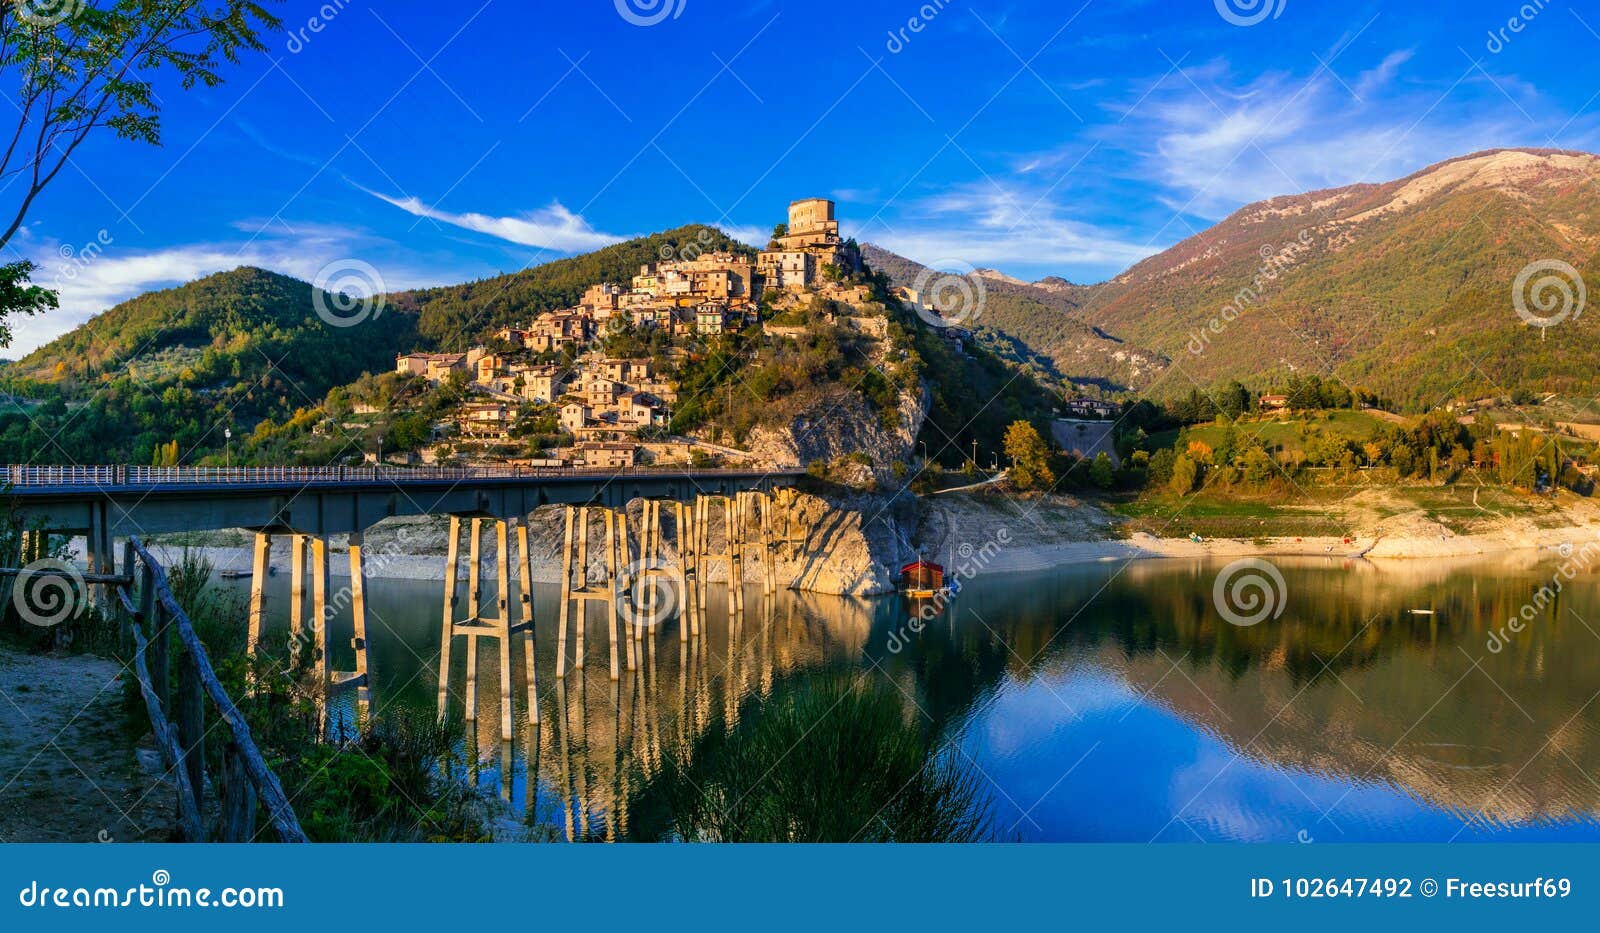 travel in italy - beautiful medieval village castel di tora and